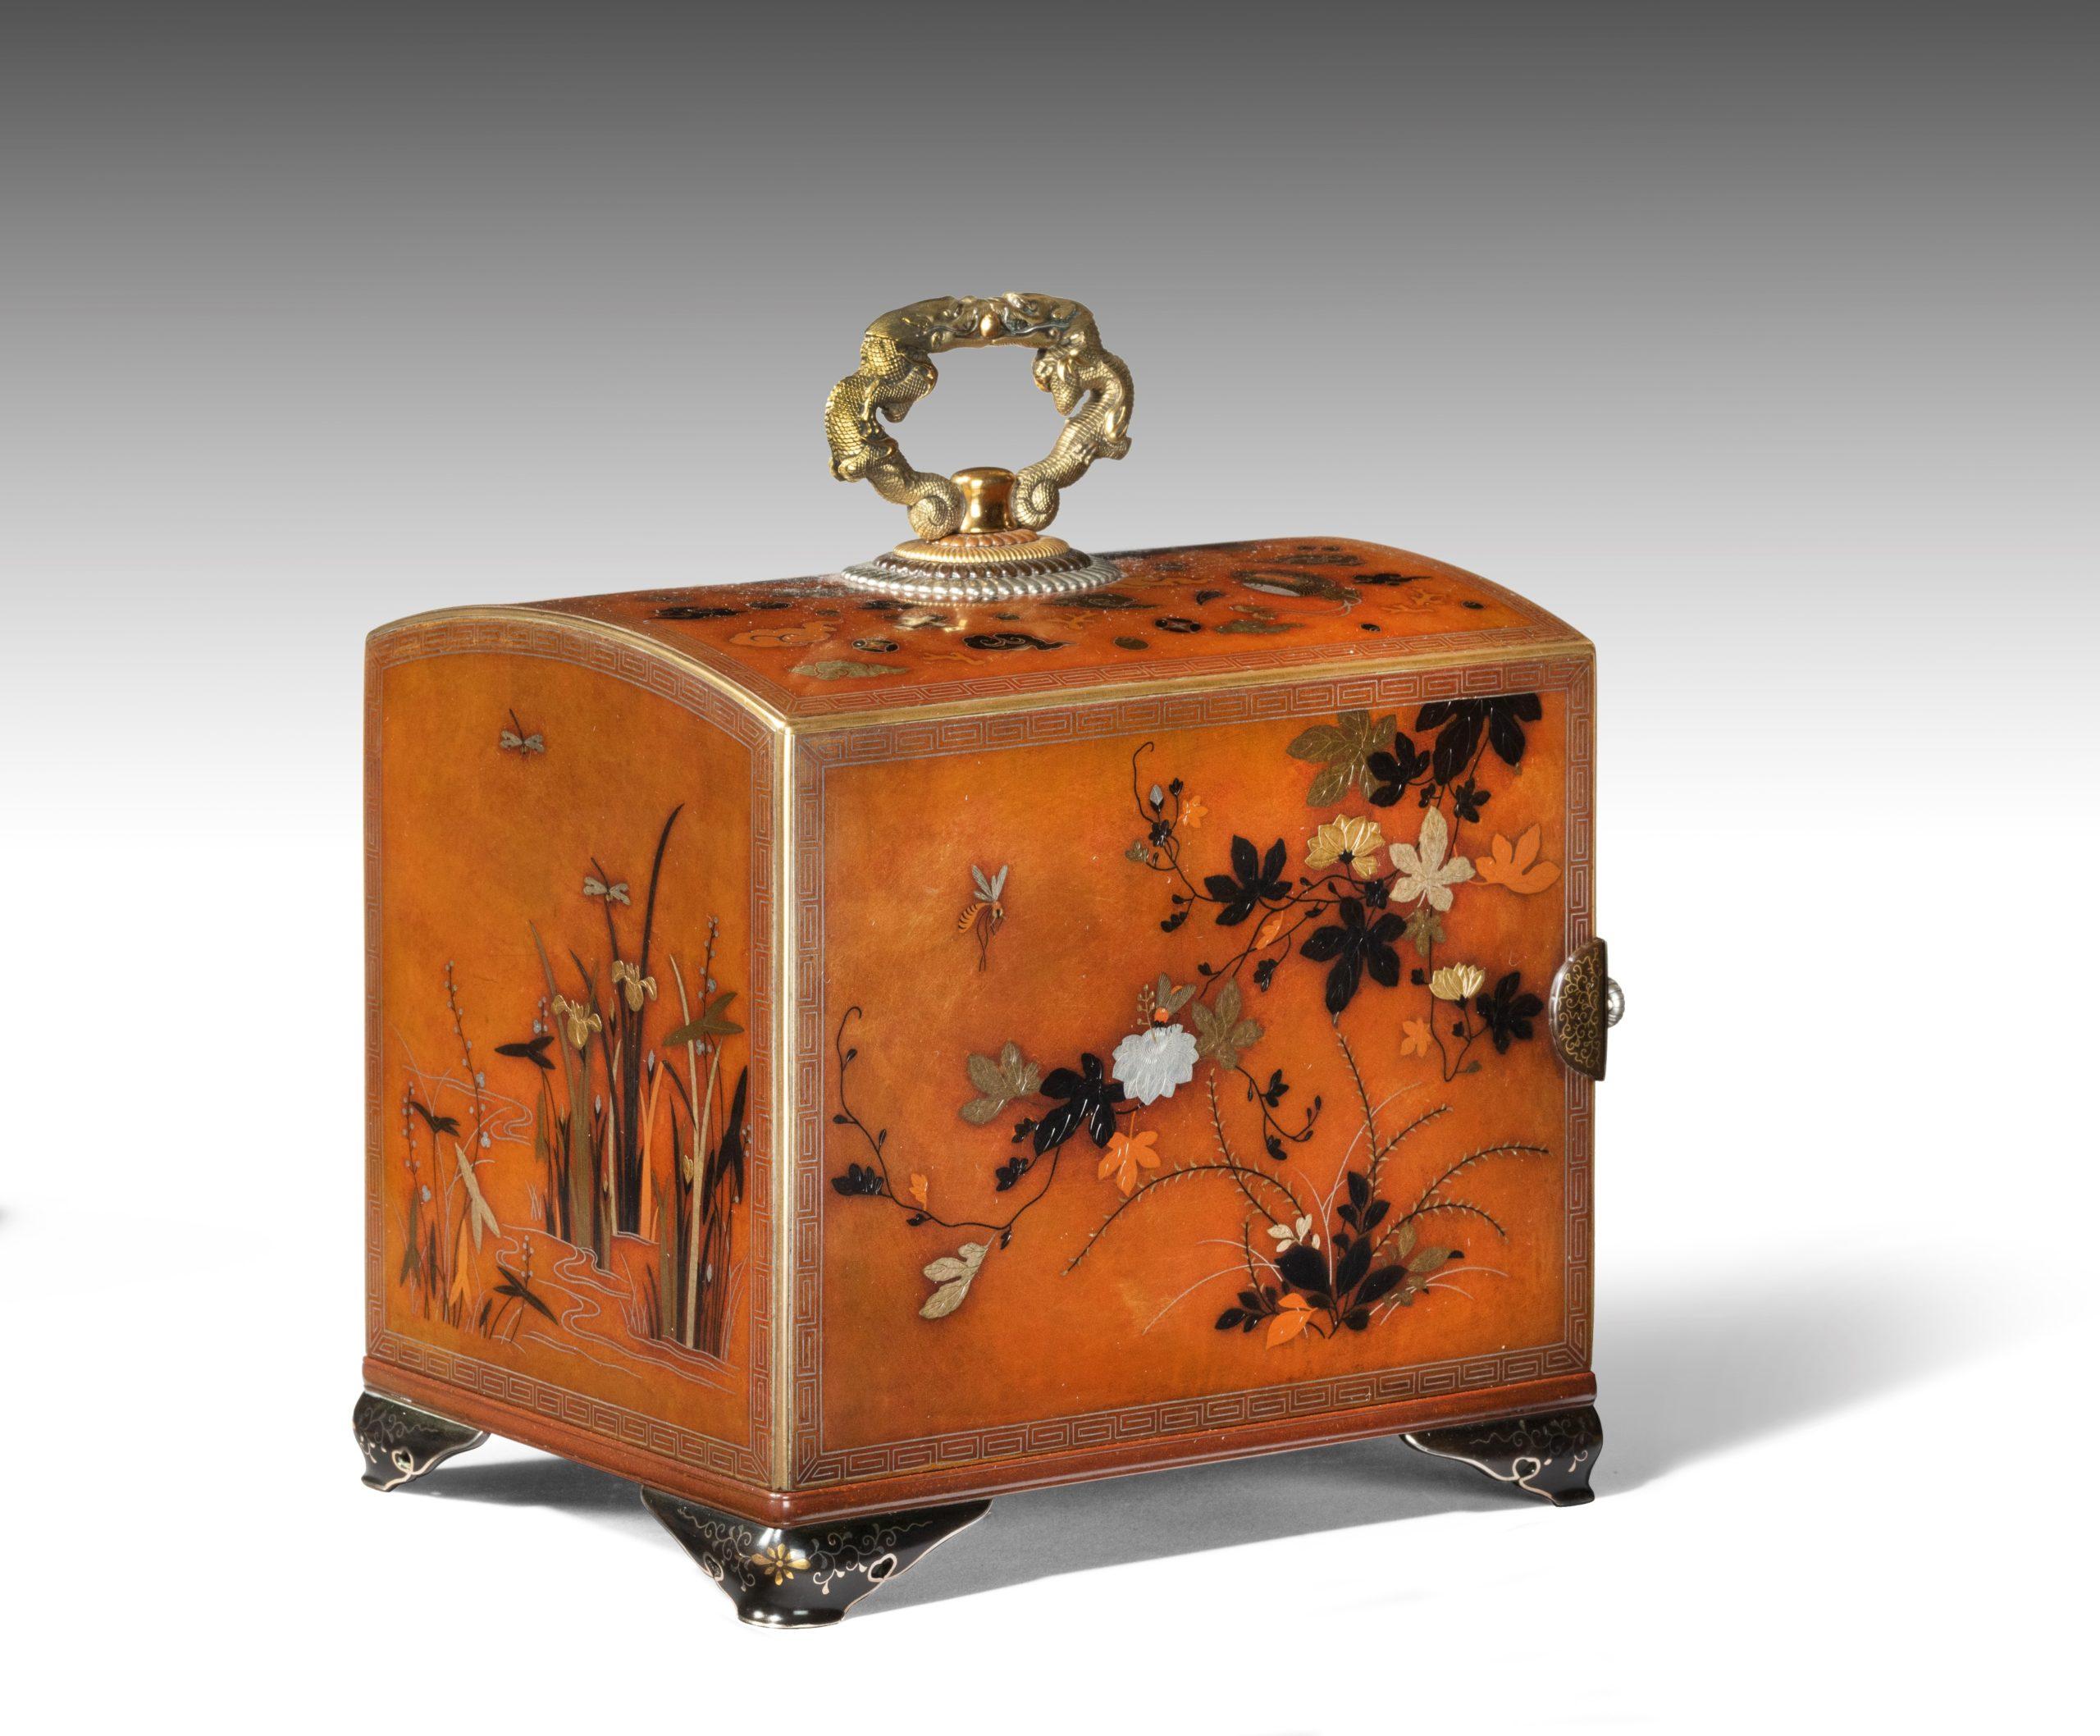 As part of our Japanese works of art collection we are delighted to bring you this exceptional Meiji Period 1868-1912 mixed metal kodansu cabinet by the highly regarded Nogawa company of Kyoto, this heavy and fine quality cabinet is a “tour de